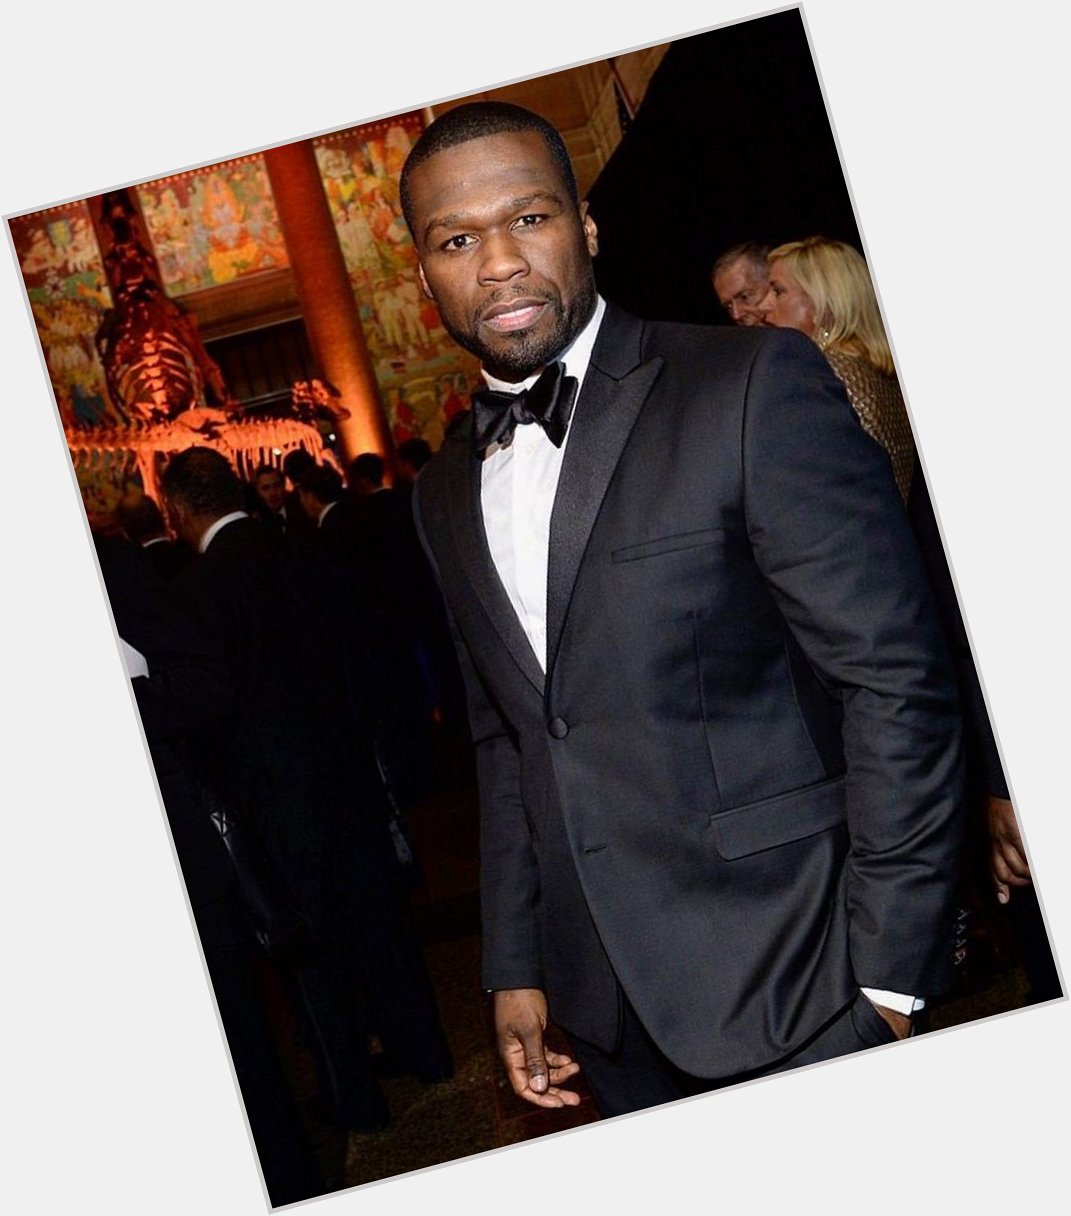 Happy 43rd birthday to 50 Cent! 